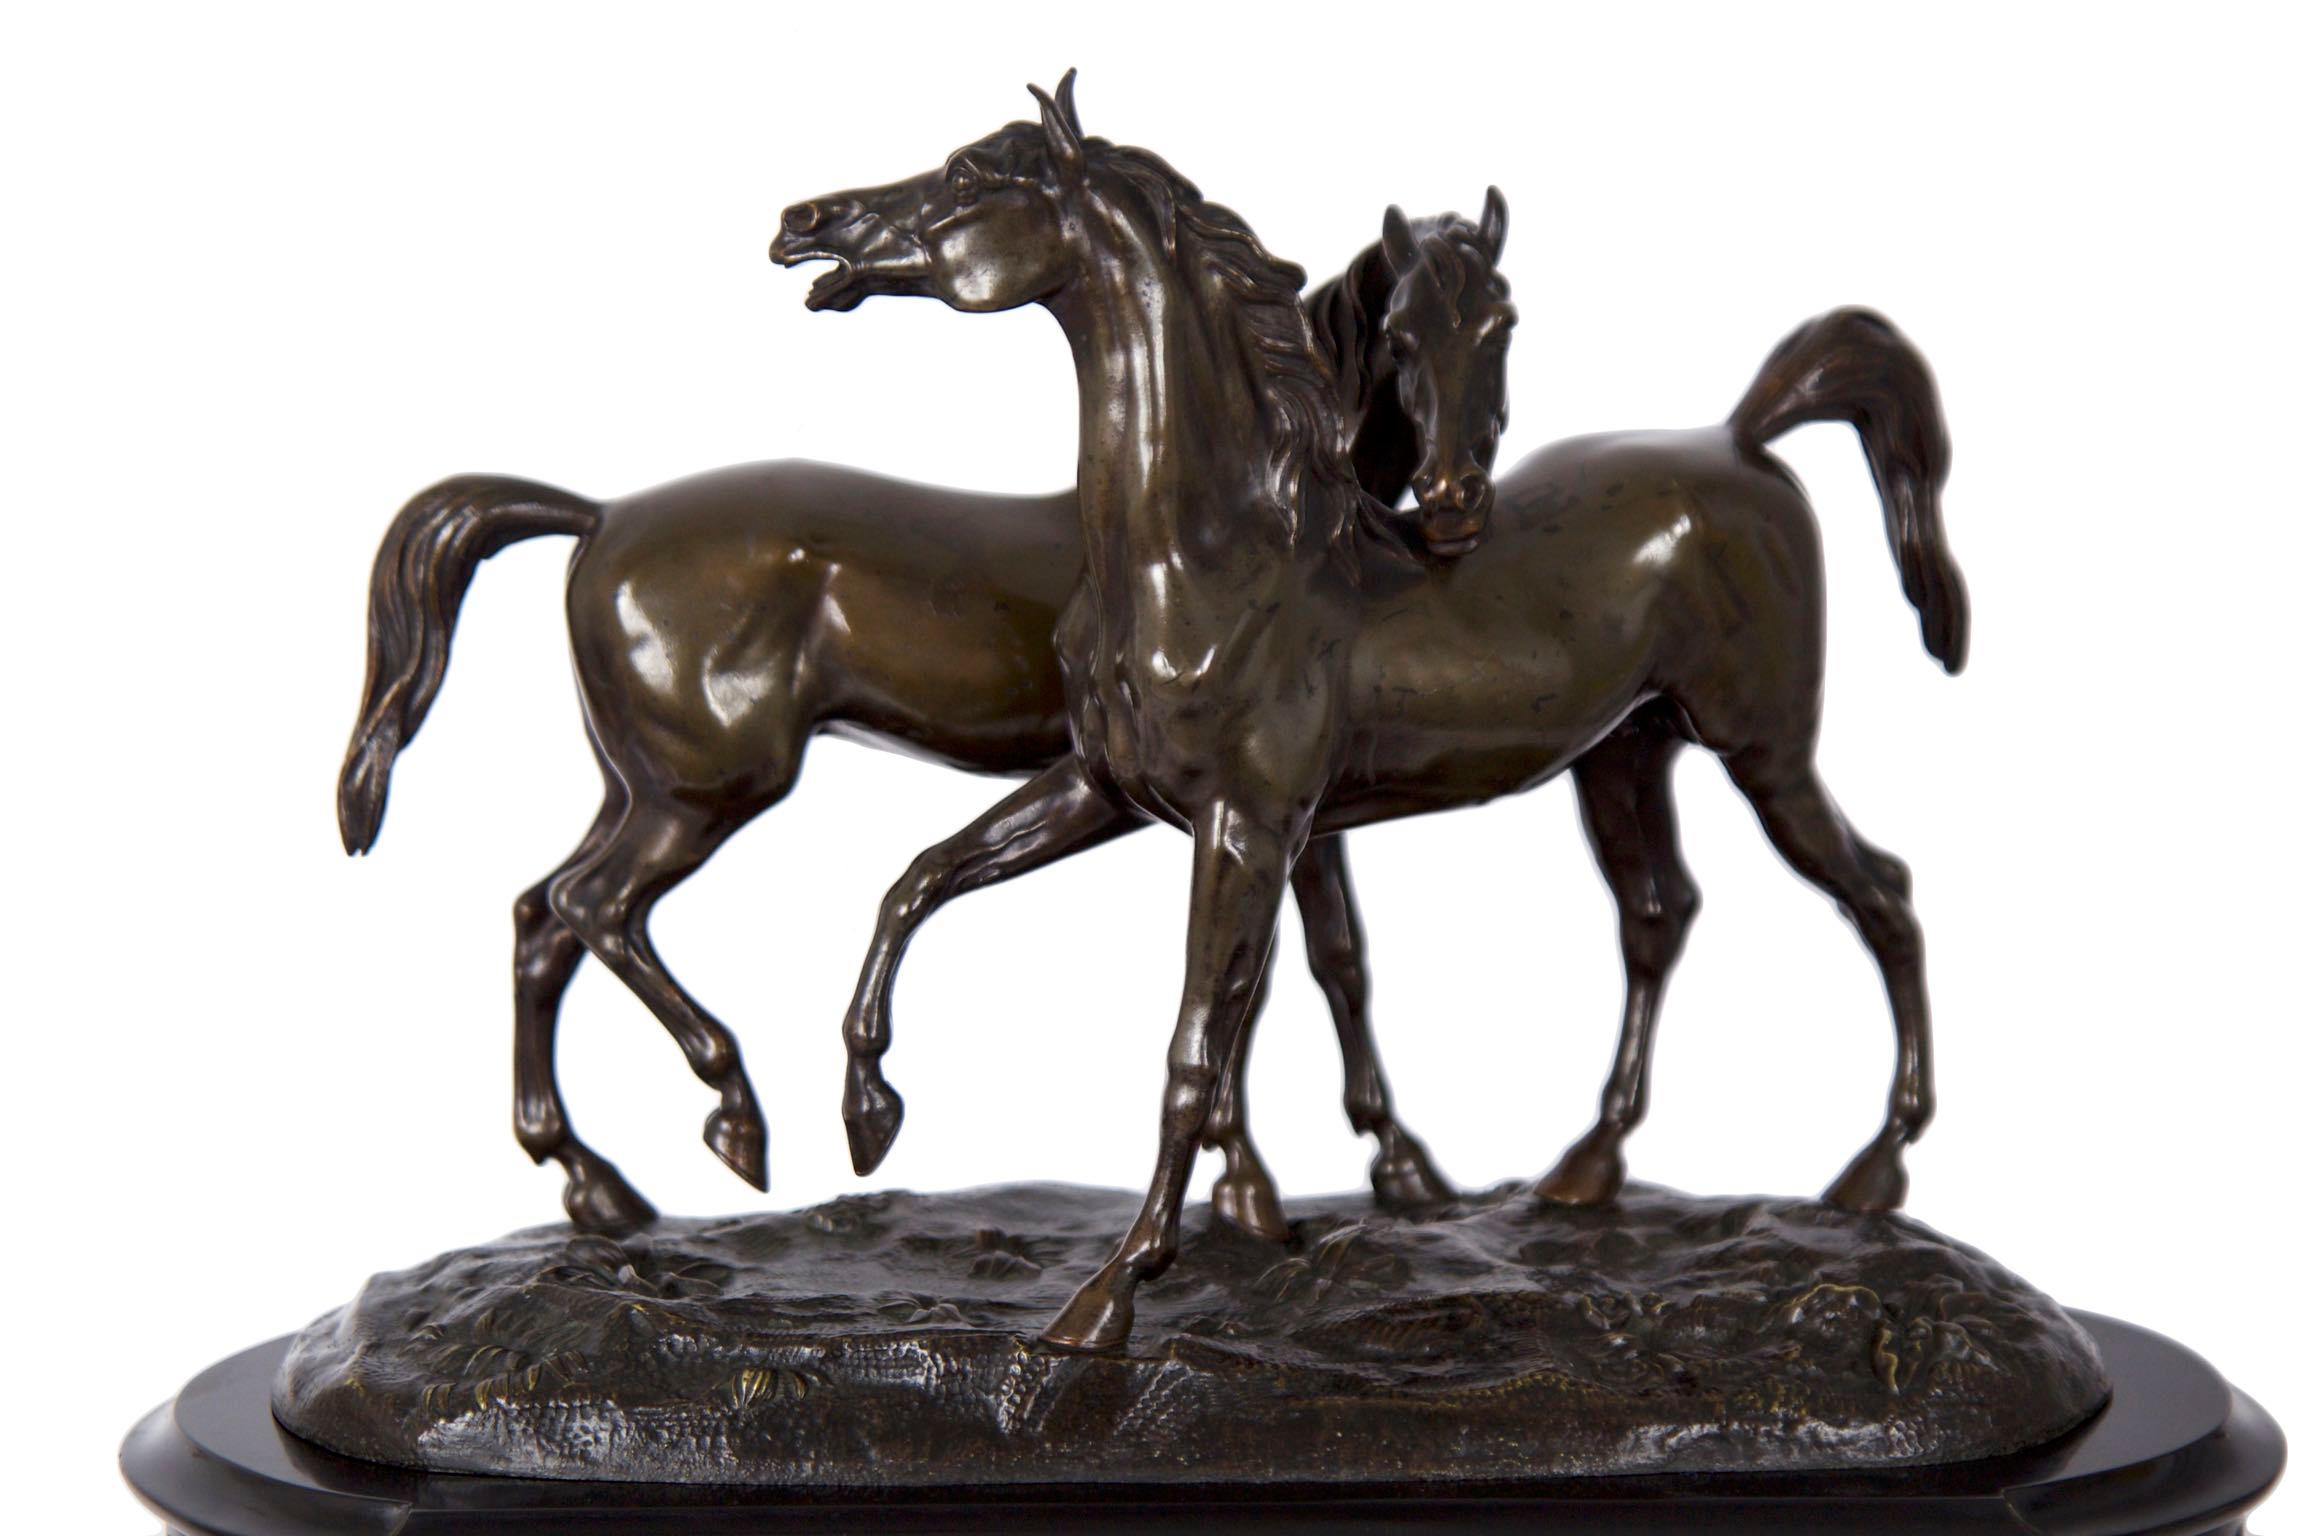 This playful figural clock is a fine representation of the Romantic idealizing that dominated the animal sculptors of the first half of the 19th century. While roughly correct anatomically in the modeling of the equestrian subjects, much more